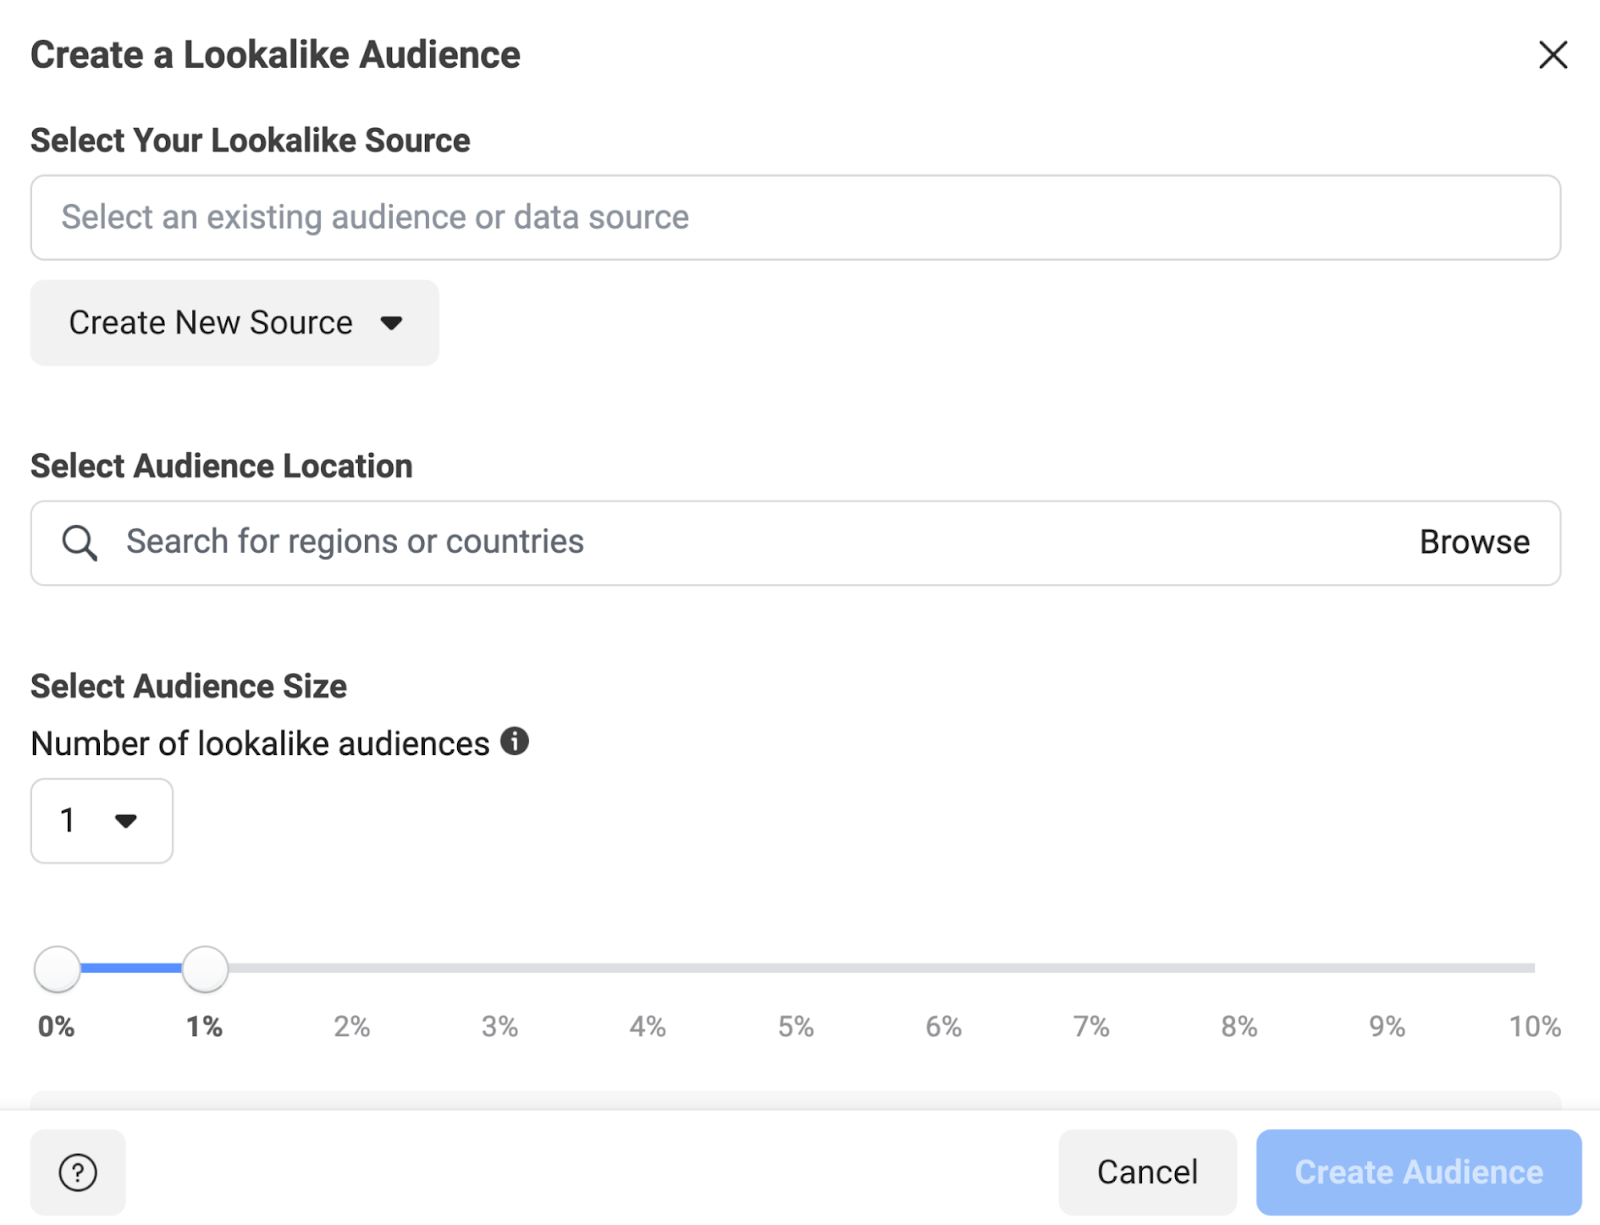 Page to set up lookalike audience 